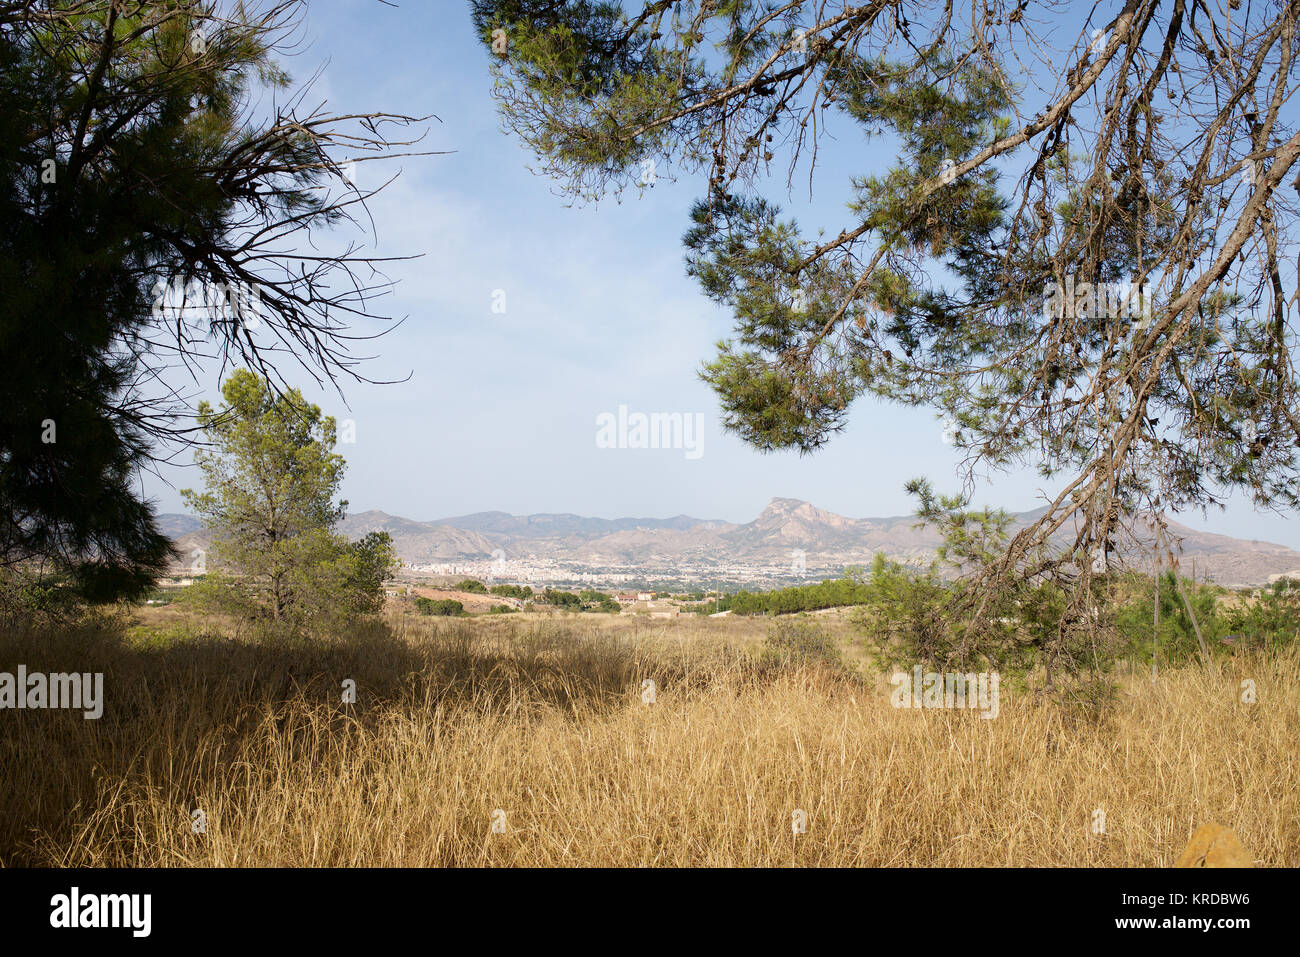 Landscape with the city of Elda in the distance Stock Photo